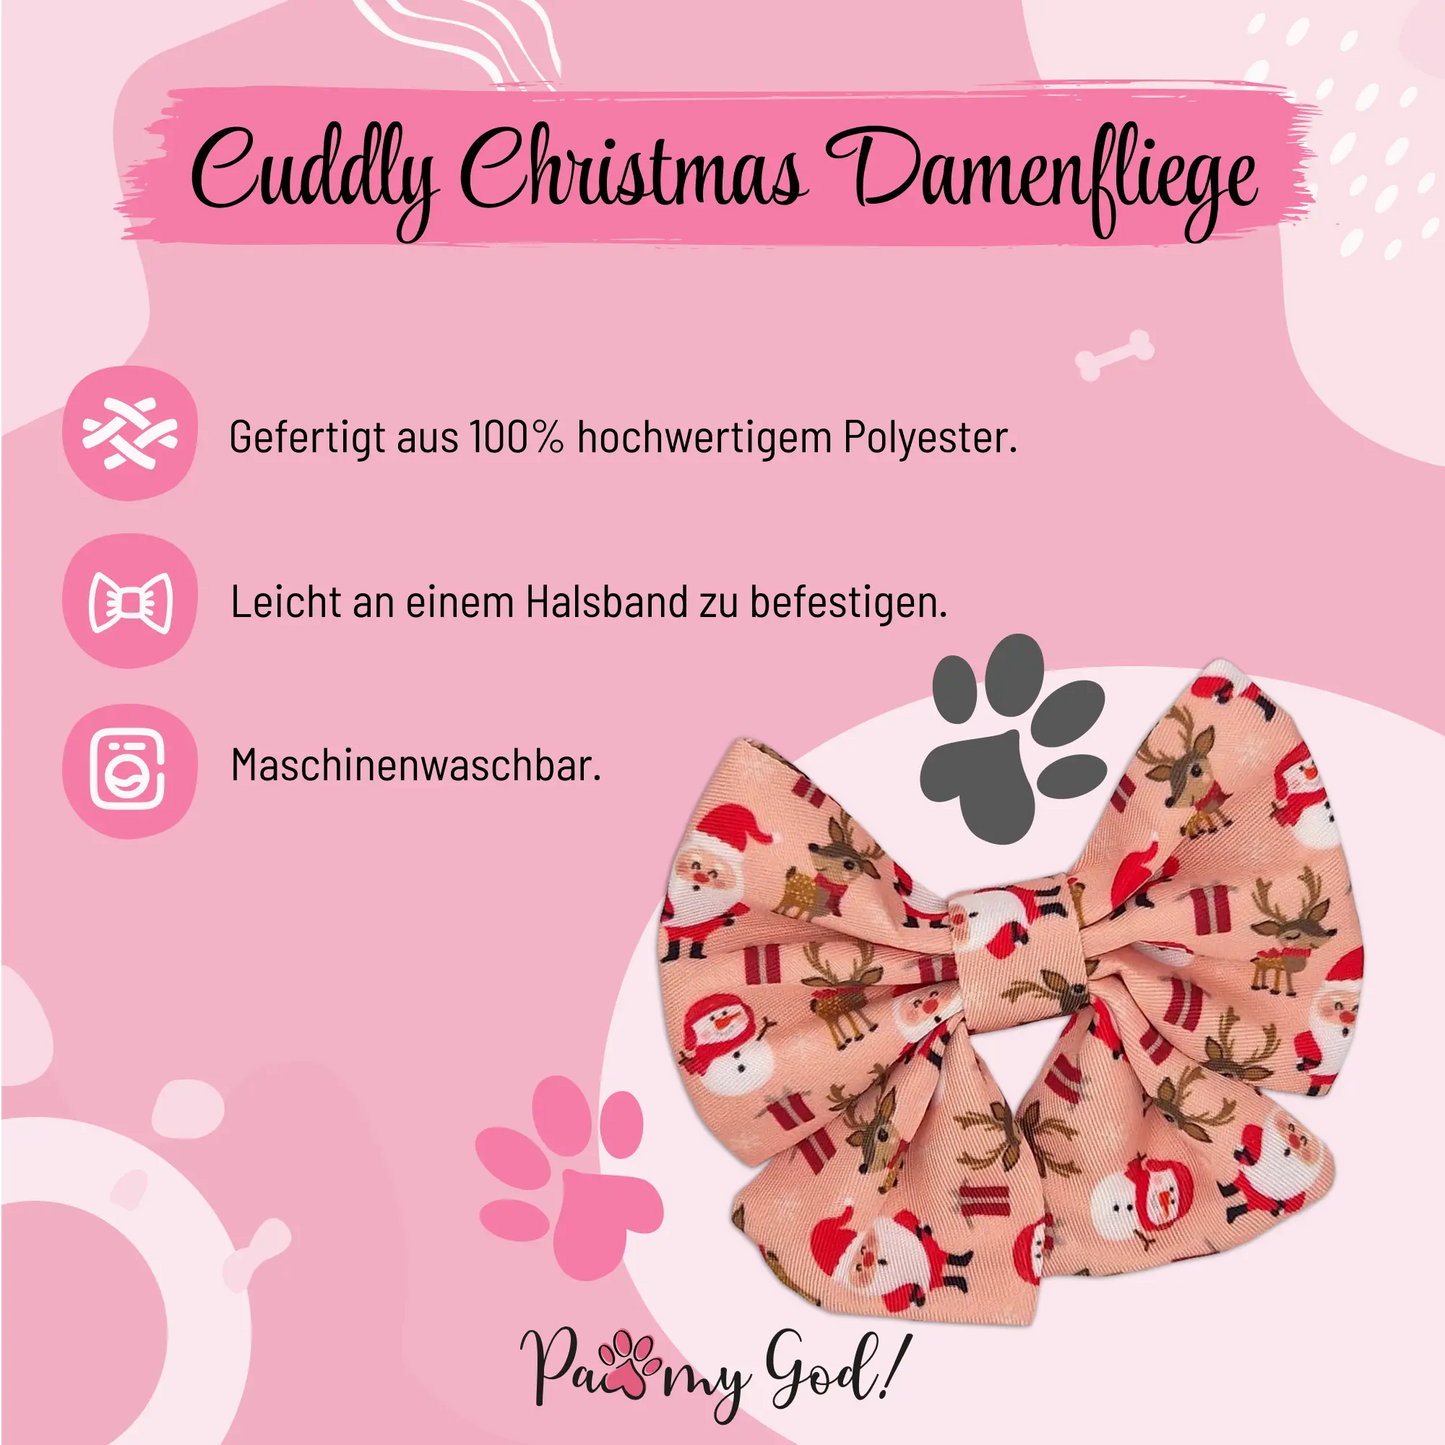 Cuddly Christmas Lady Bow Features